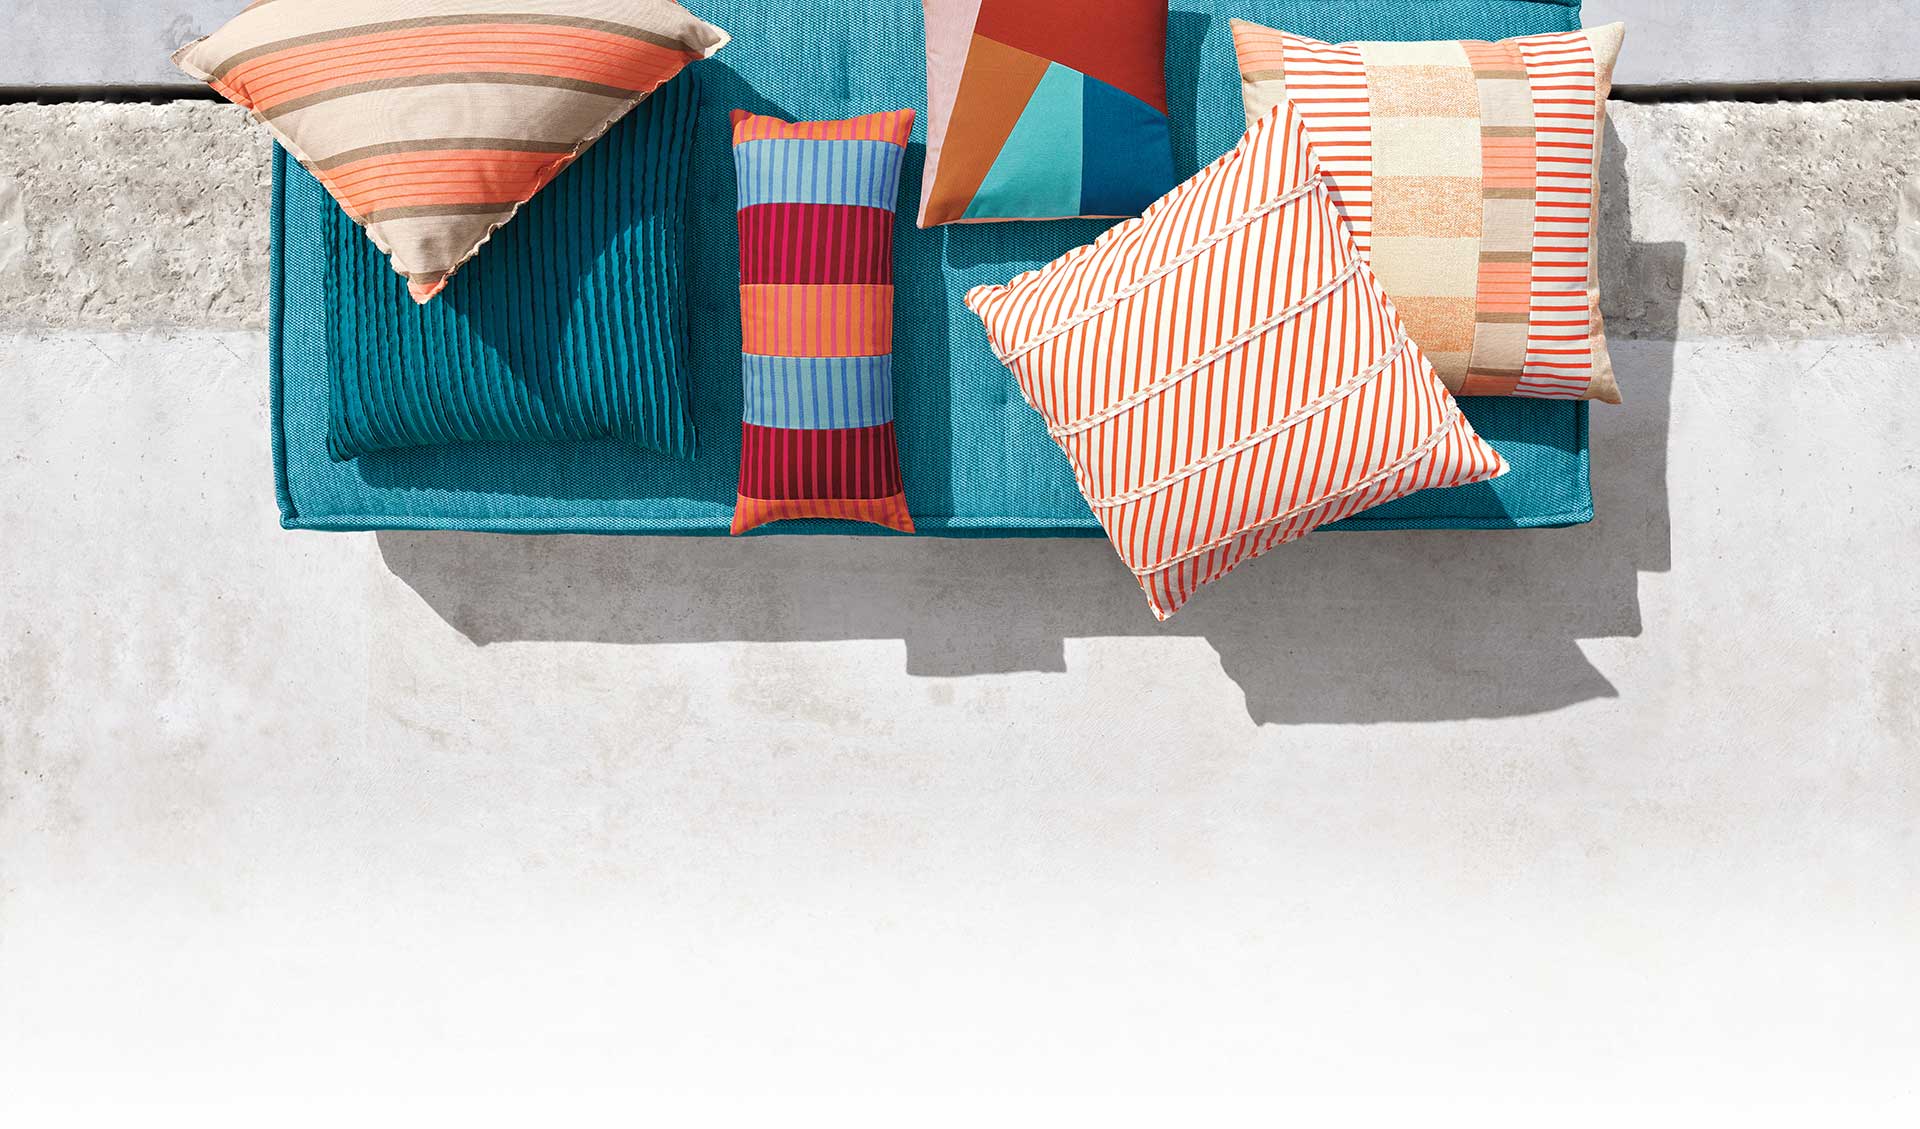 Close-up photo with teal floor cushion with pillows.